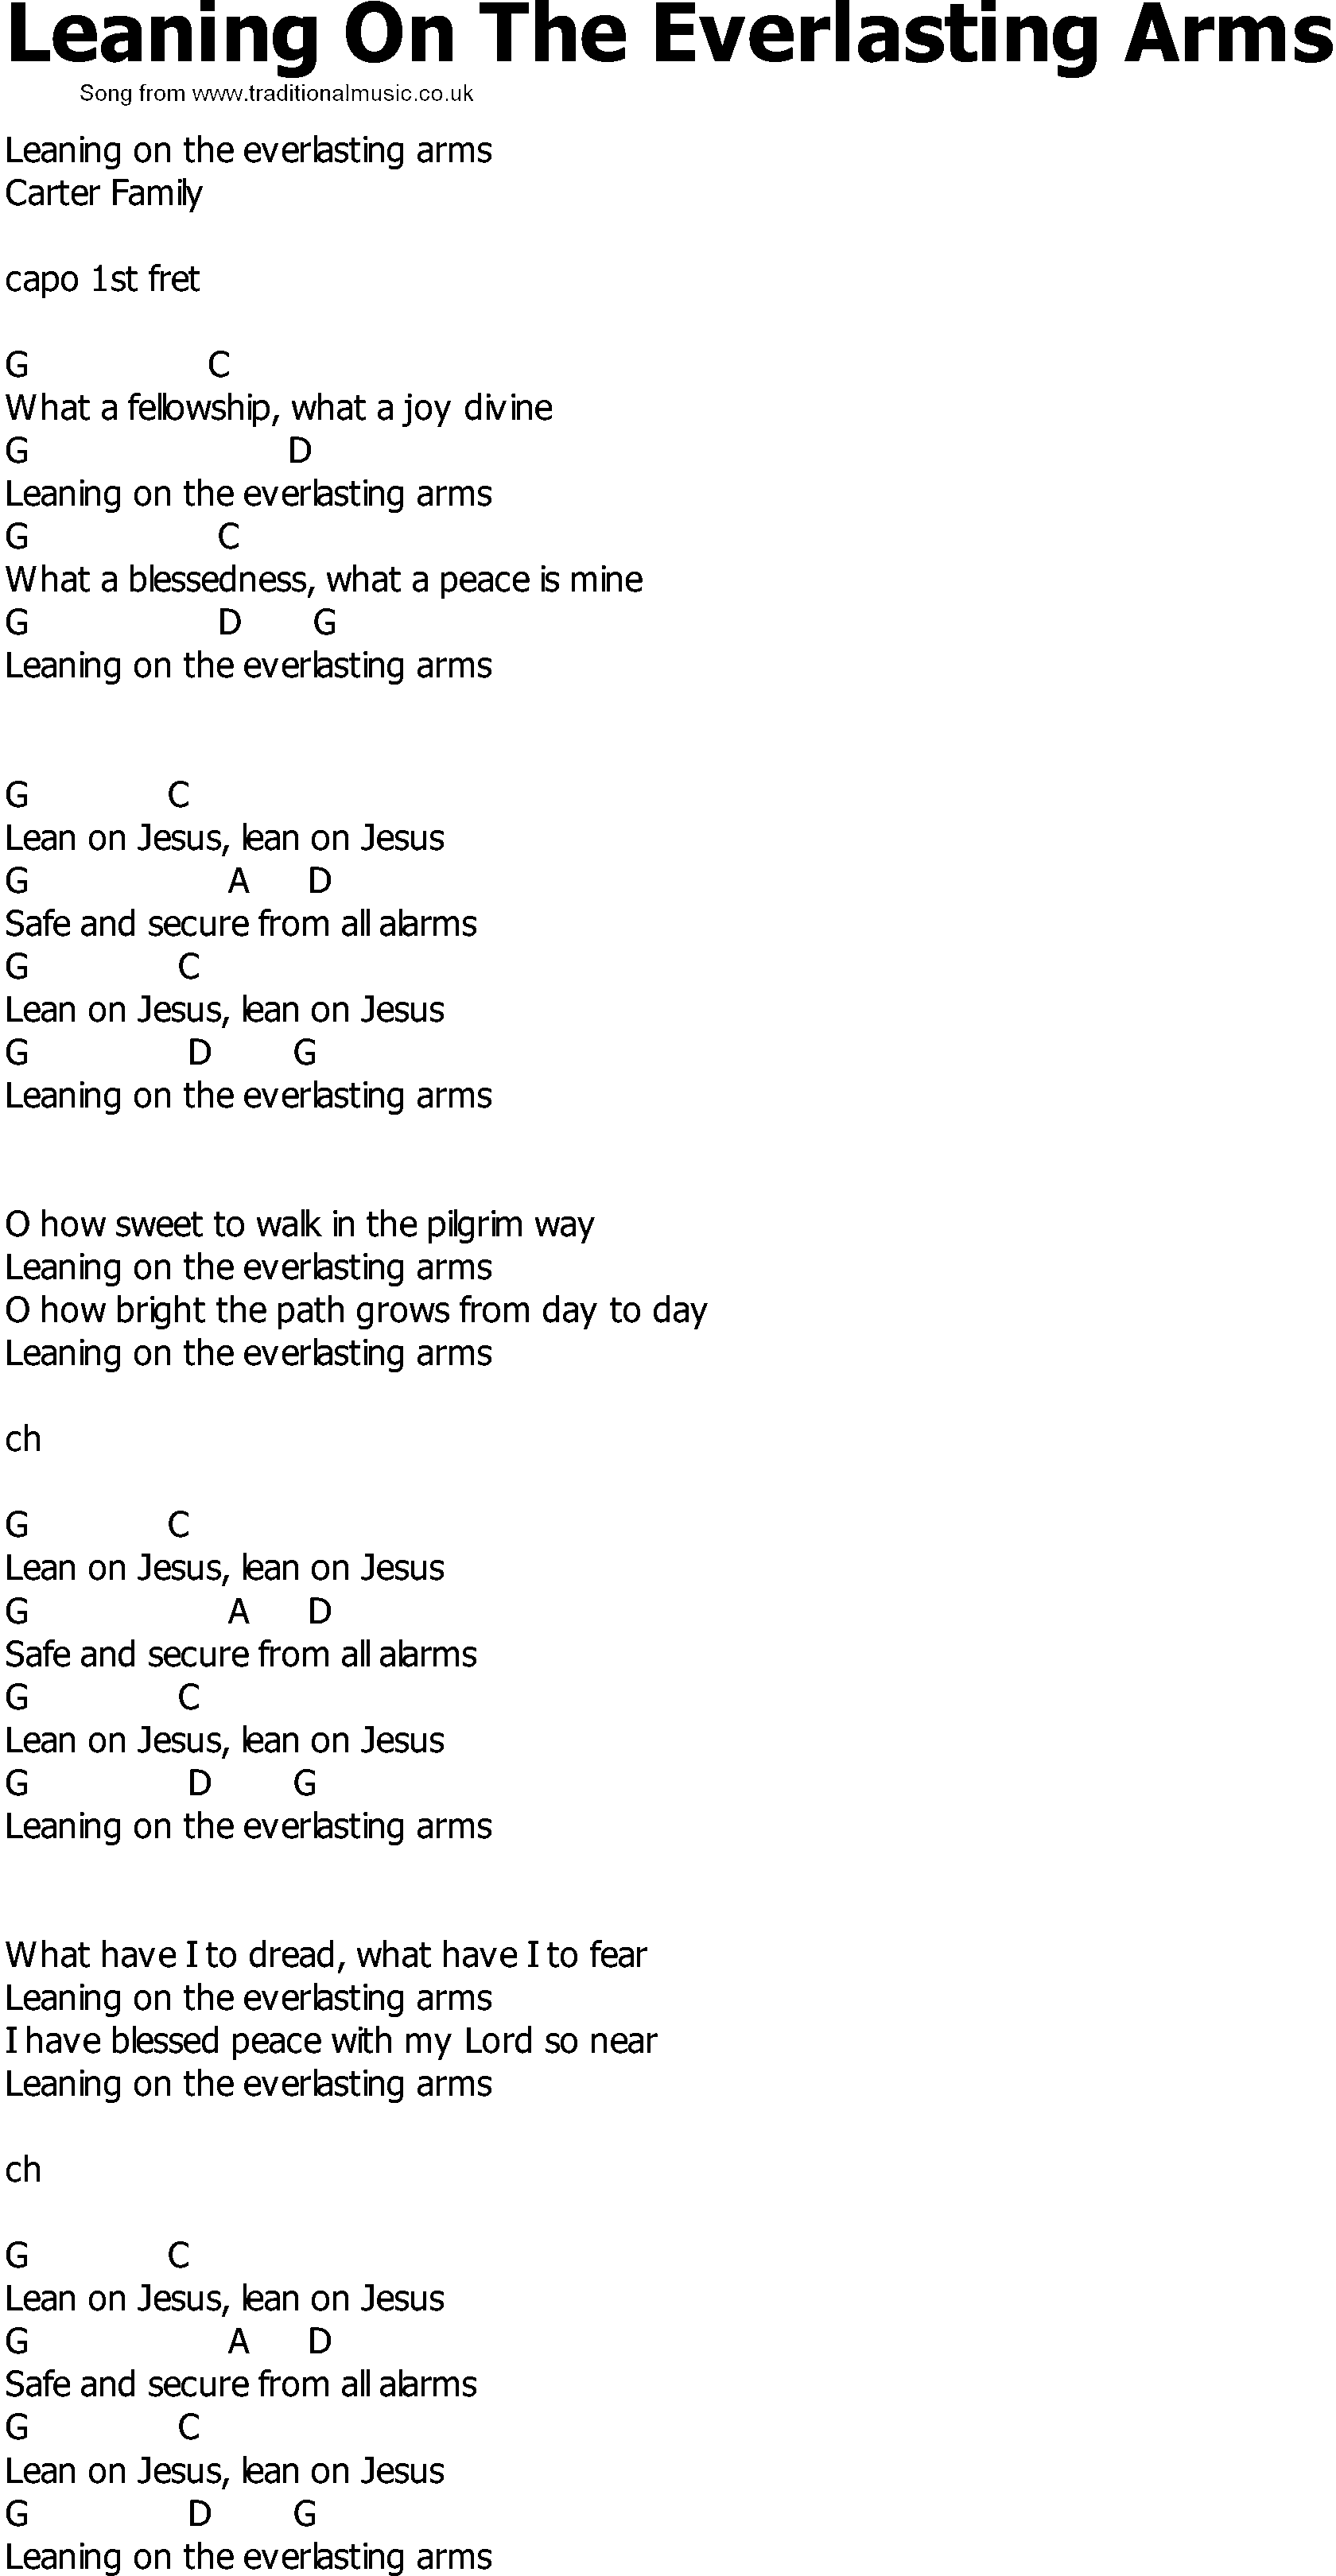 Old Country song lyrics with chords - Leaning On The Everlasting Arms